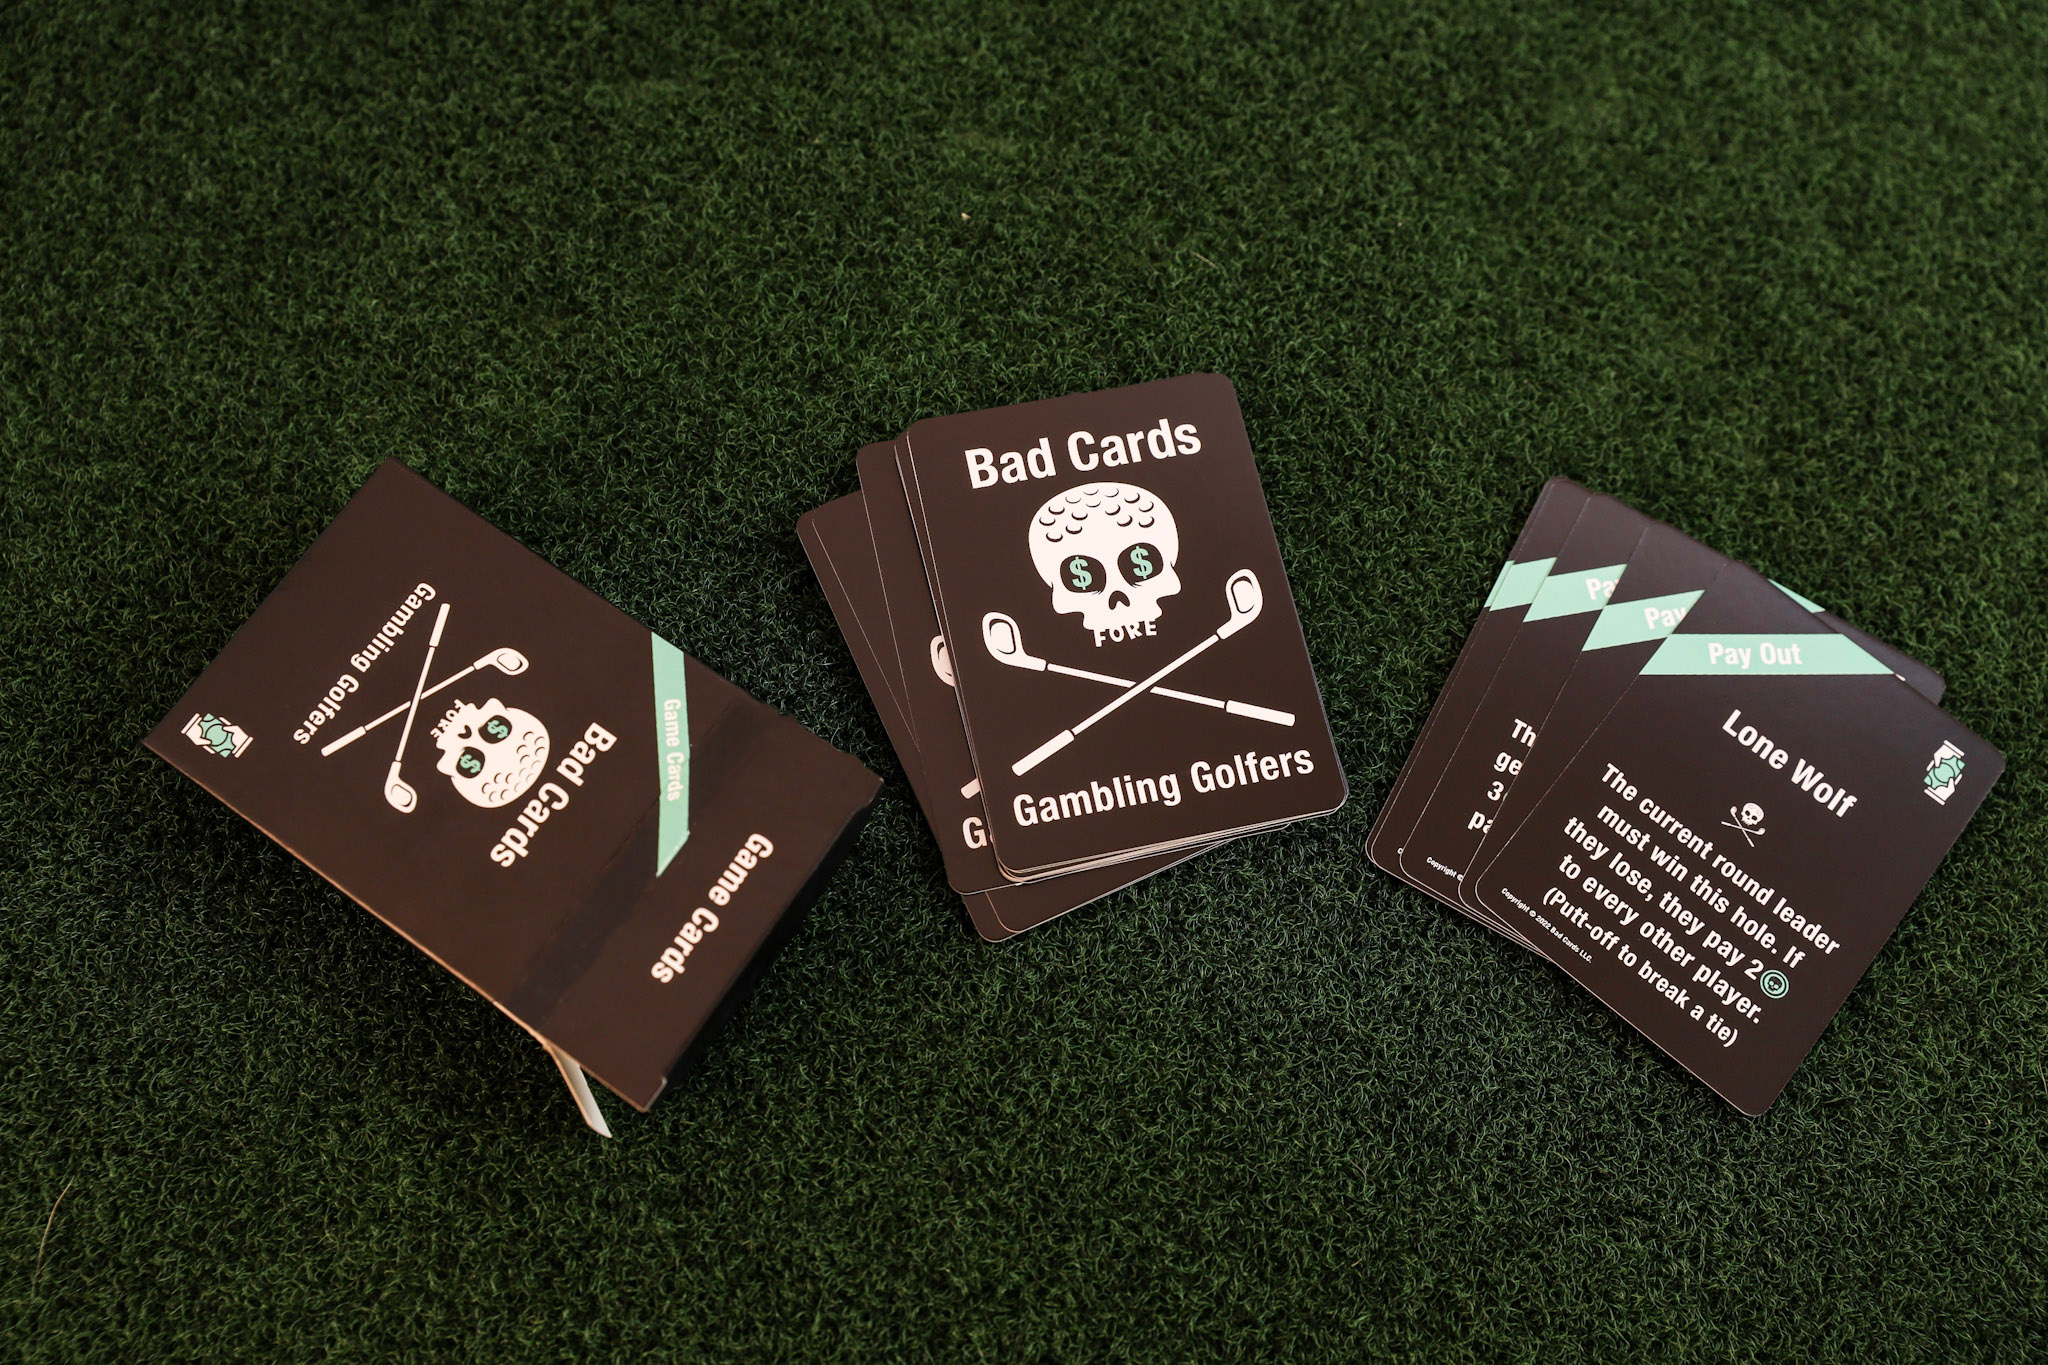 Bad Cards Fore Gambling Golfers